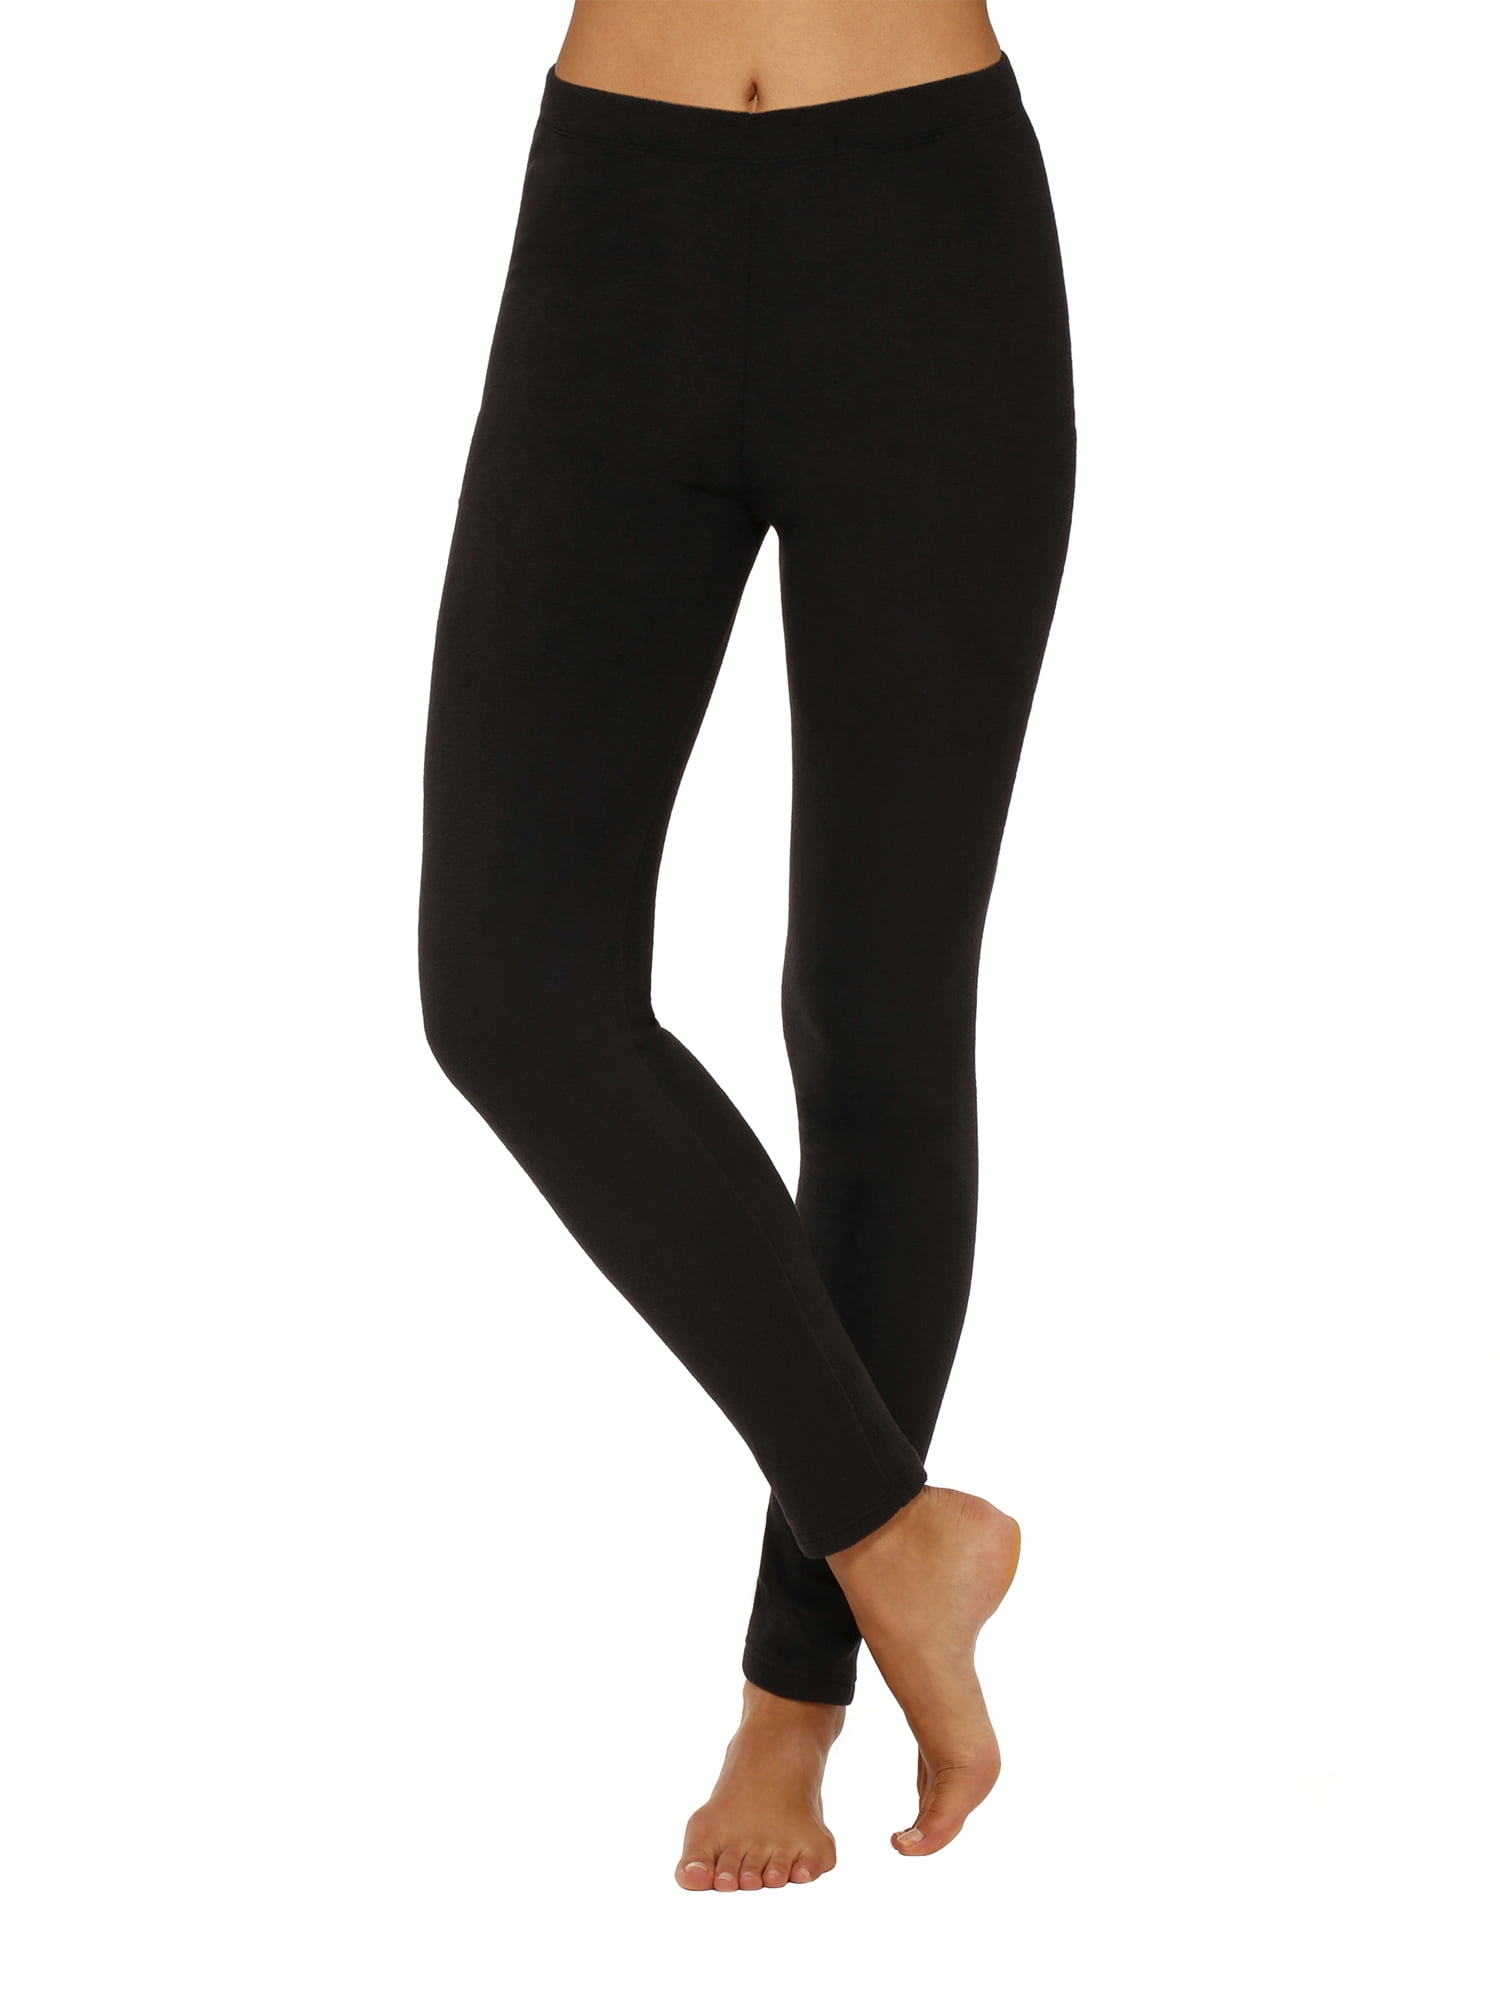 6 PACK ALL SOLIDS Winter Warmth Women's High-Waisted Solid Fleece Leggings 